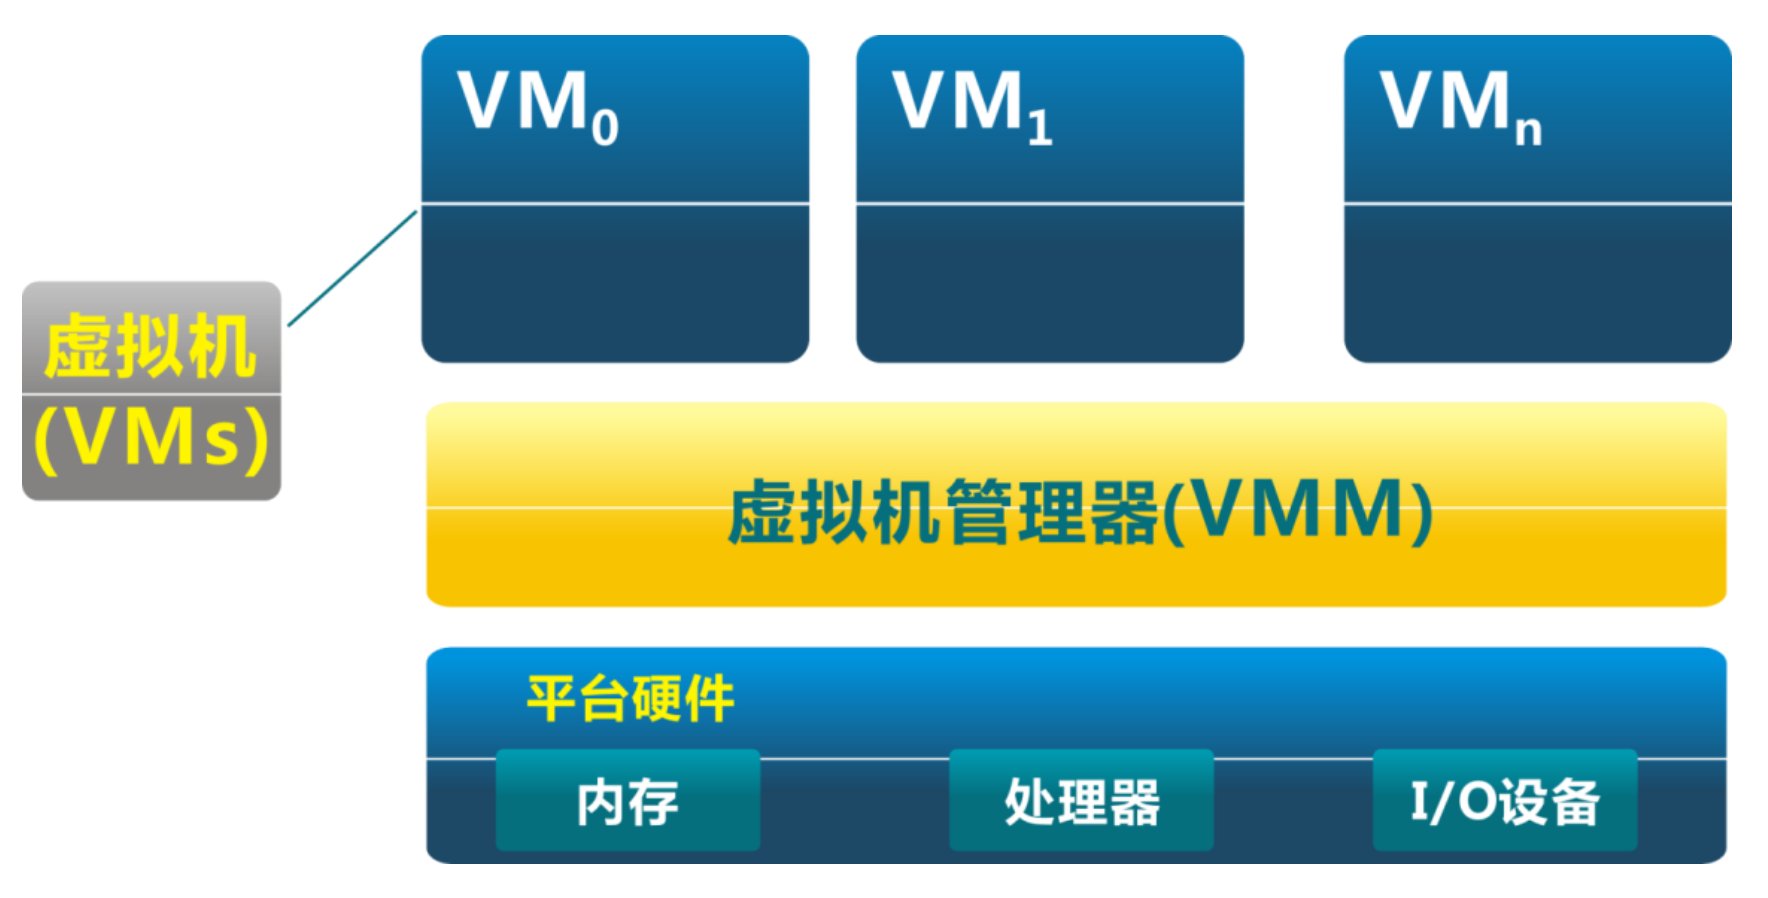 vmm-arch.png